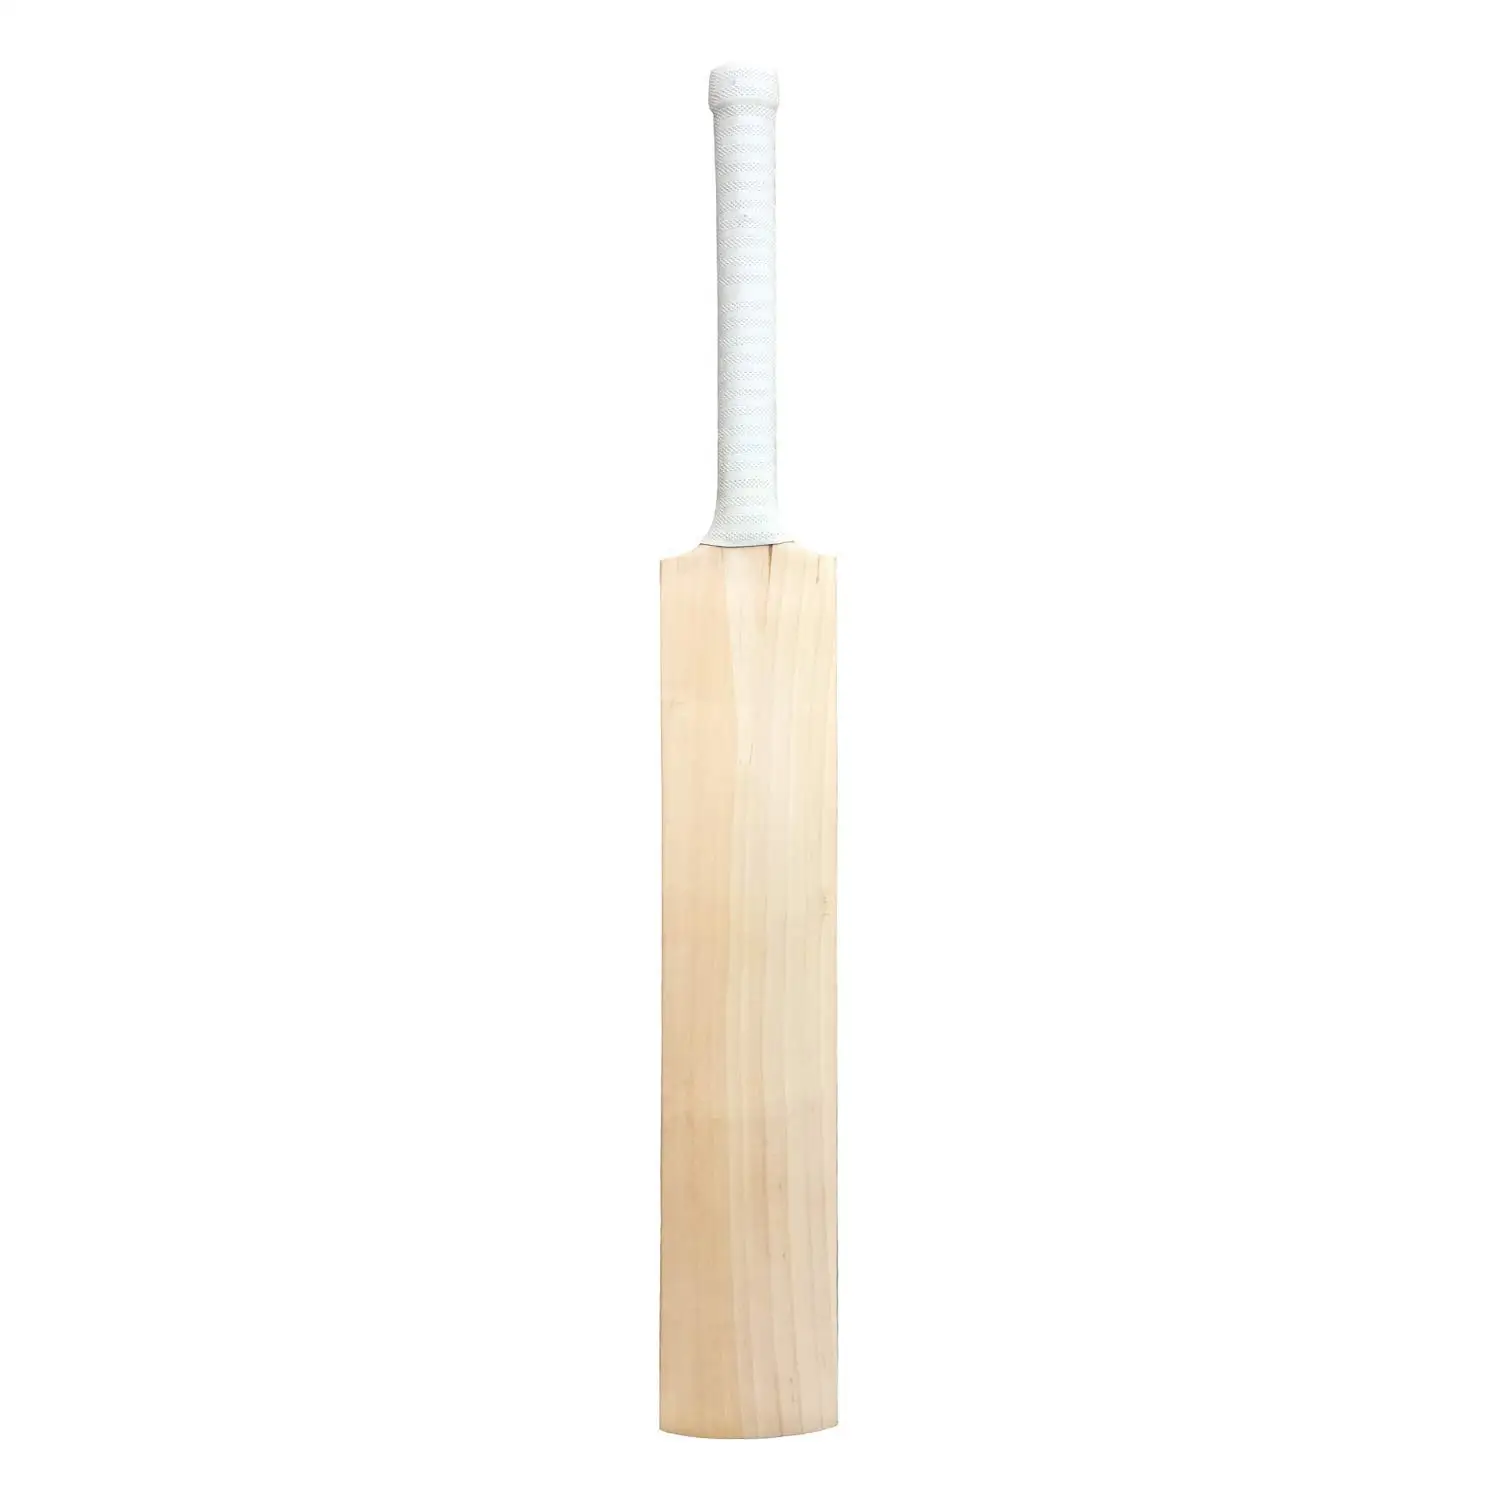 2021 Limited Edition English Willow Cricket Bats / Professional Players Light Weight Cricket Bats